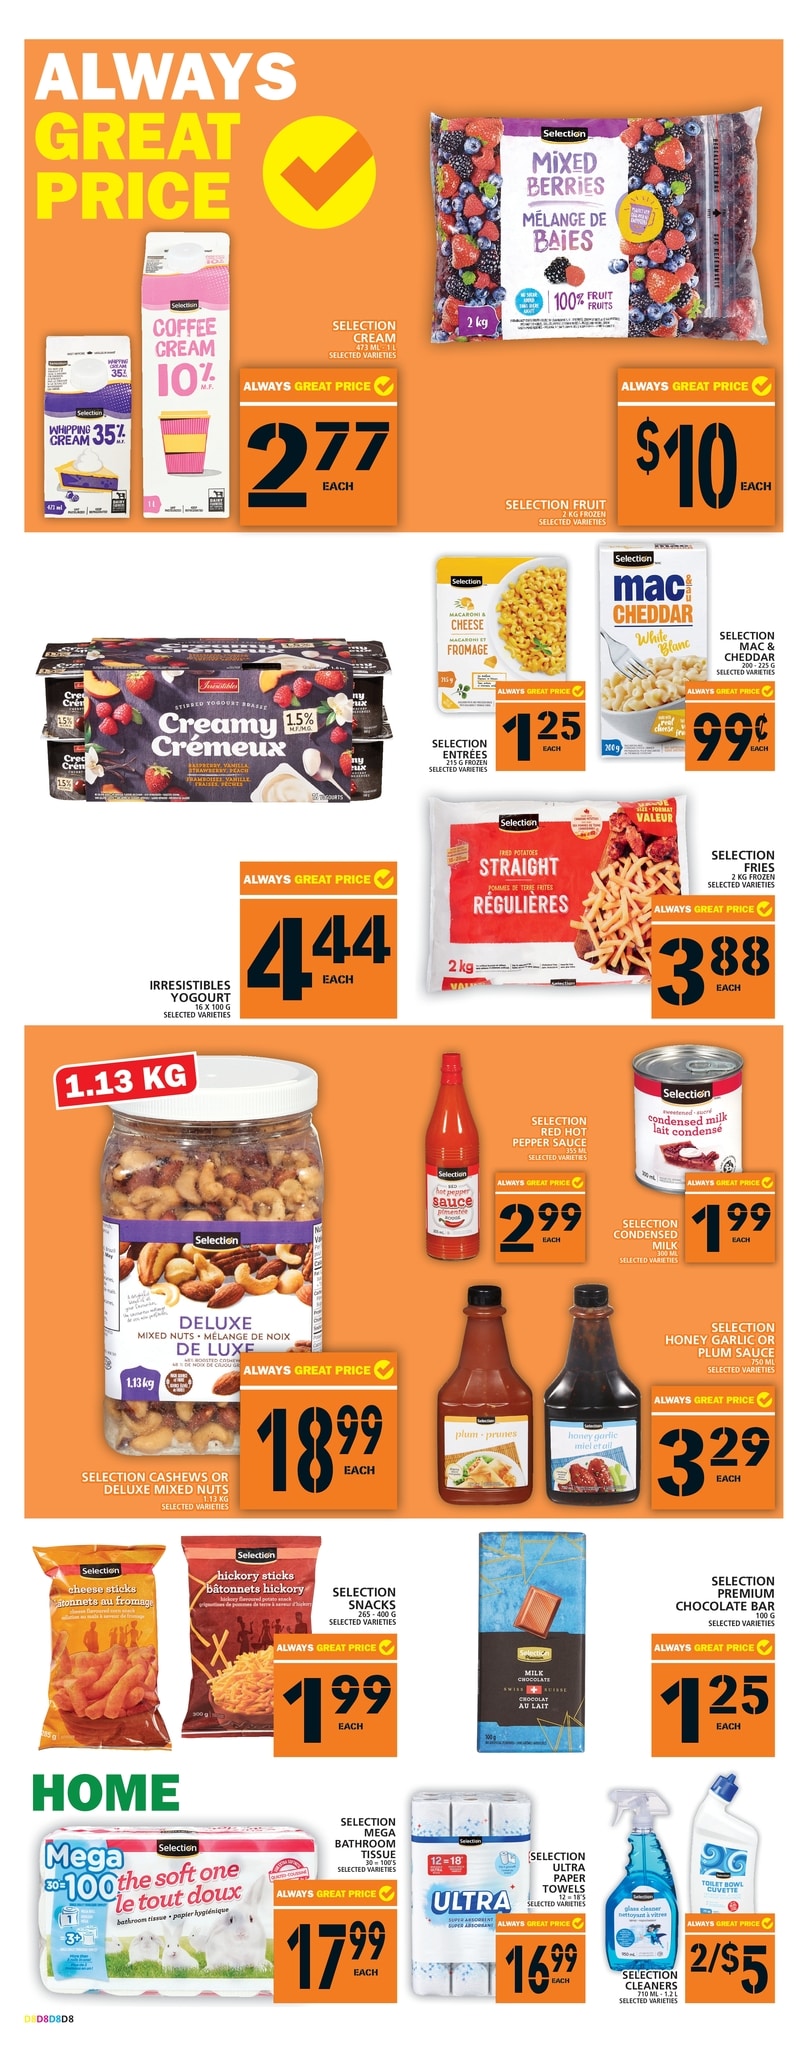 Food Basics - Weekly Flyer Specials - Page 11